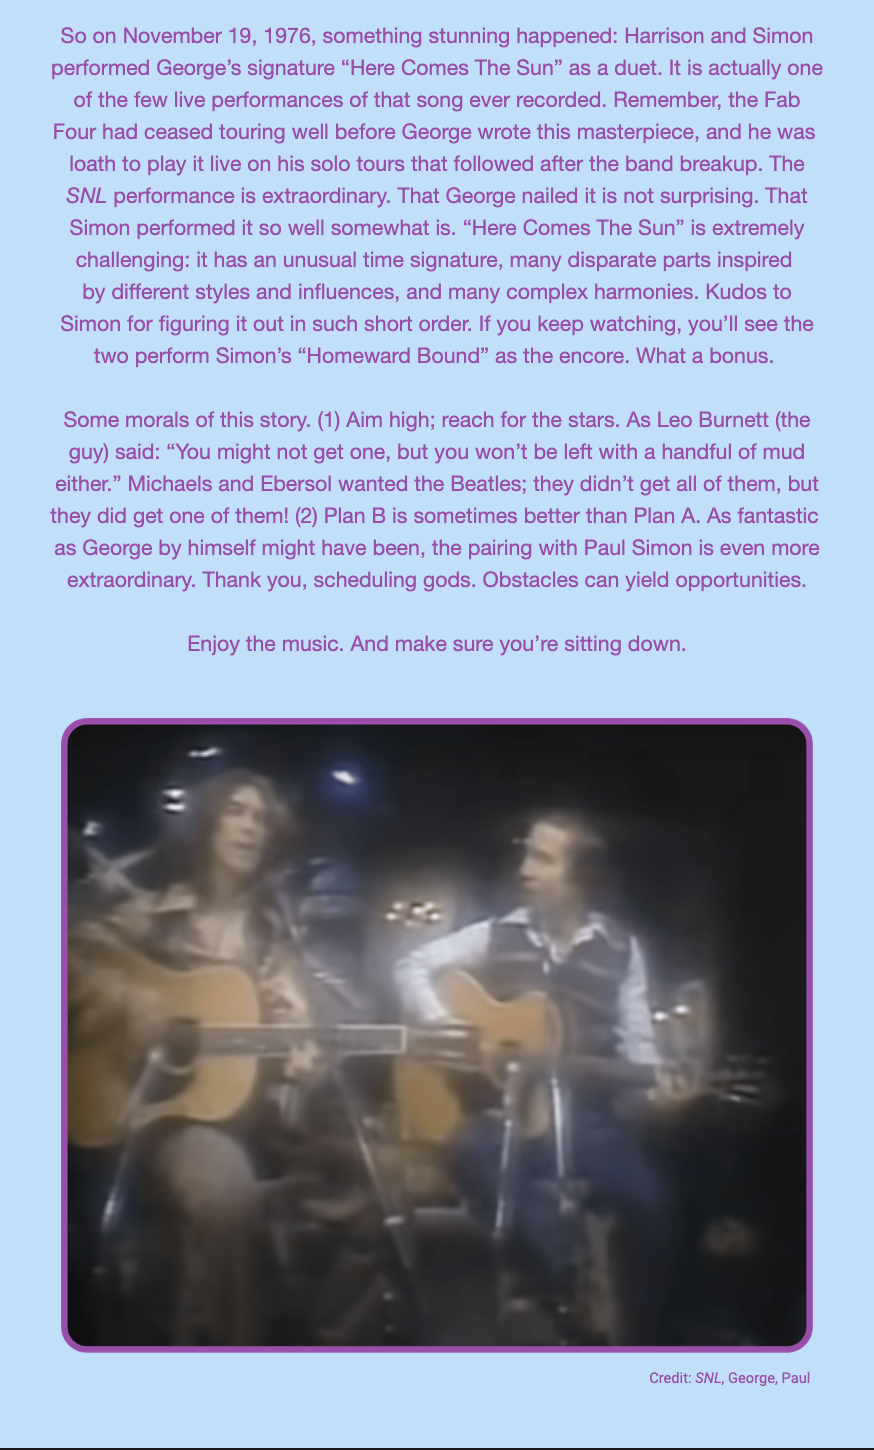 The image includes a text block and a still image from a video. Here is the alt text including all of the text that appears in the image:

"The image has a purple border and features a block of text at the top, recounting a significant event from November 19, 1976, when George Harrison and Paul Simon performed "Here Comes The Sun" as a duet on 'Saturday Night Live' (SNL). It is noted as one of the few live performances of the song and highlights the extraordinary nature of the performance due to the song's complex harmonies and unusual time signature. The story elaborates on SNL's attempt to reunite The Beatles for a performance, which ultimately led to the duet. The morals of the story include aiming high and appreciating that sometimes Plan B can be better than Plan A, emphasizing that the pairing of George Harrison with Paul Simon created an extraordinary musical moment.

Below the text is a blurred still image from the SNL performance, showing George Harrison and Paul Simon playing guitars. The text encourages the reader to enjoy the music and to sit down, implying the significance of the performance. At the bottom right, the image is credited to 'SNL, George, Paul'."